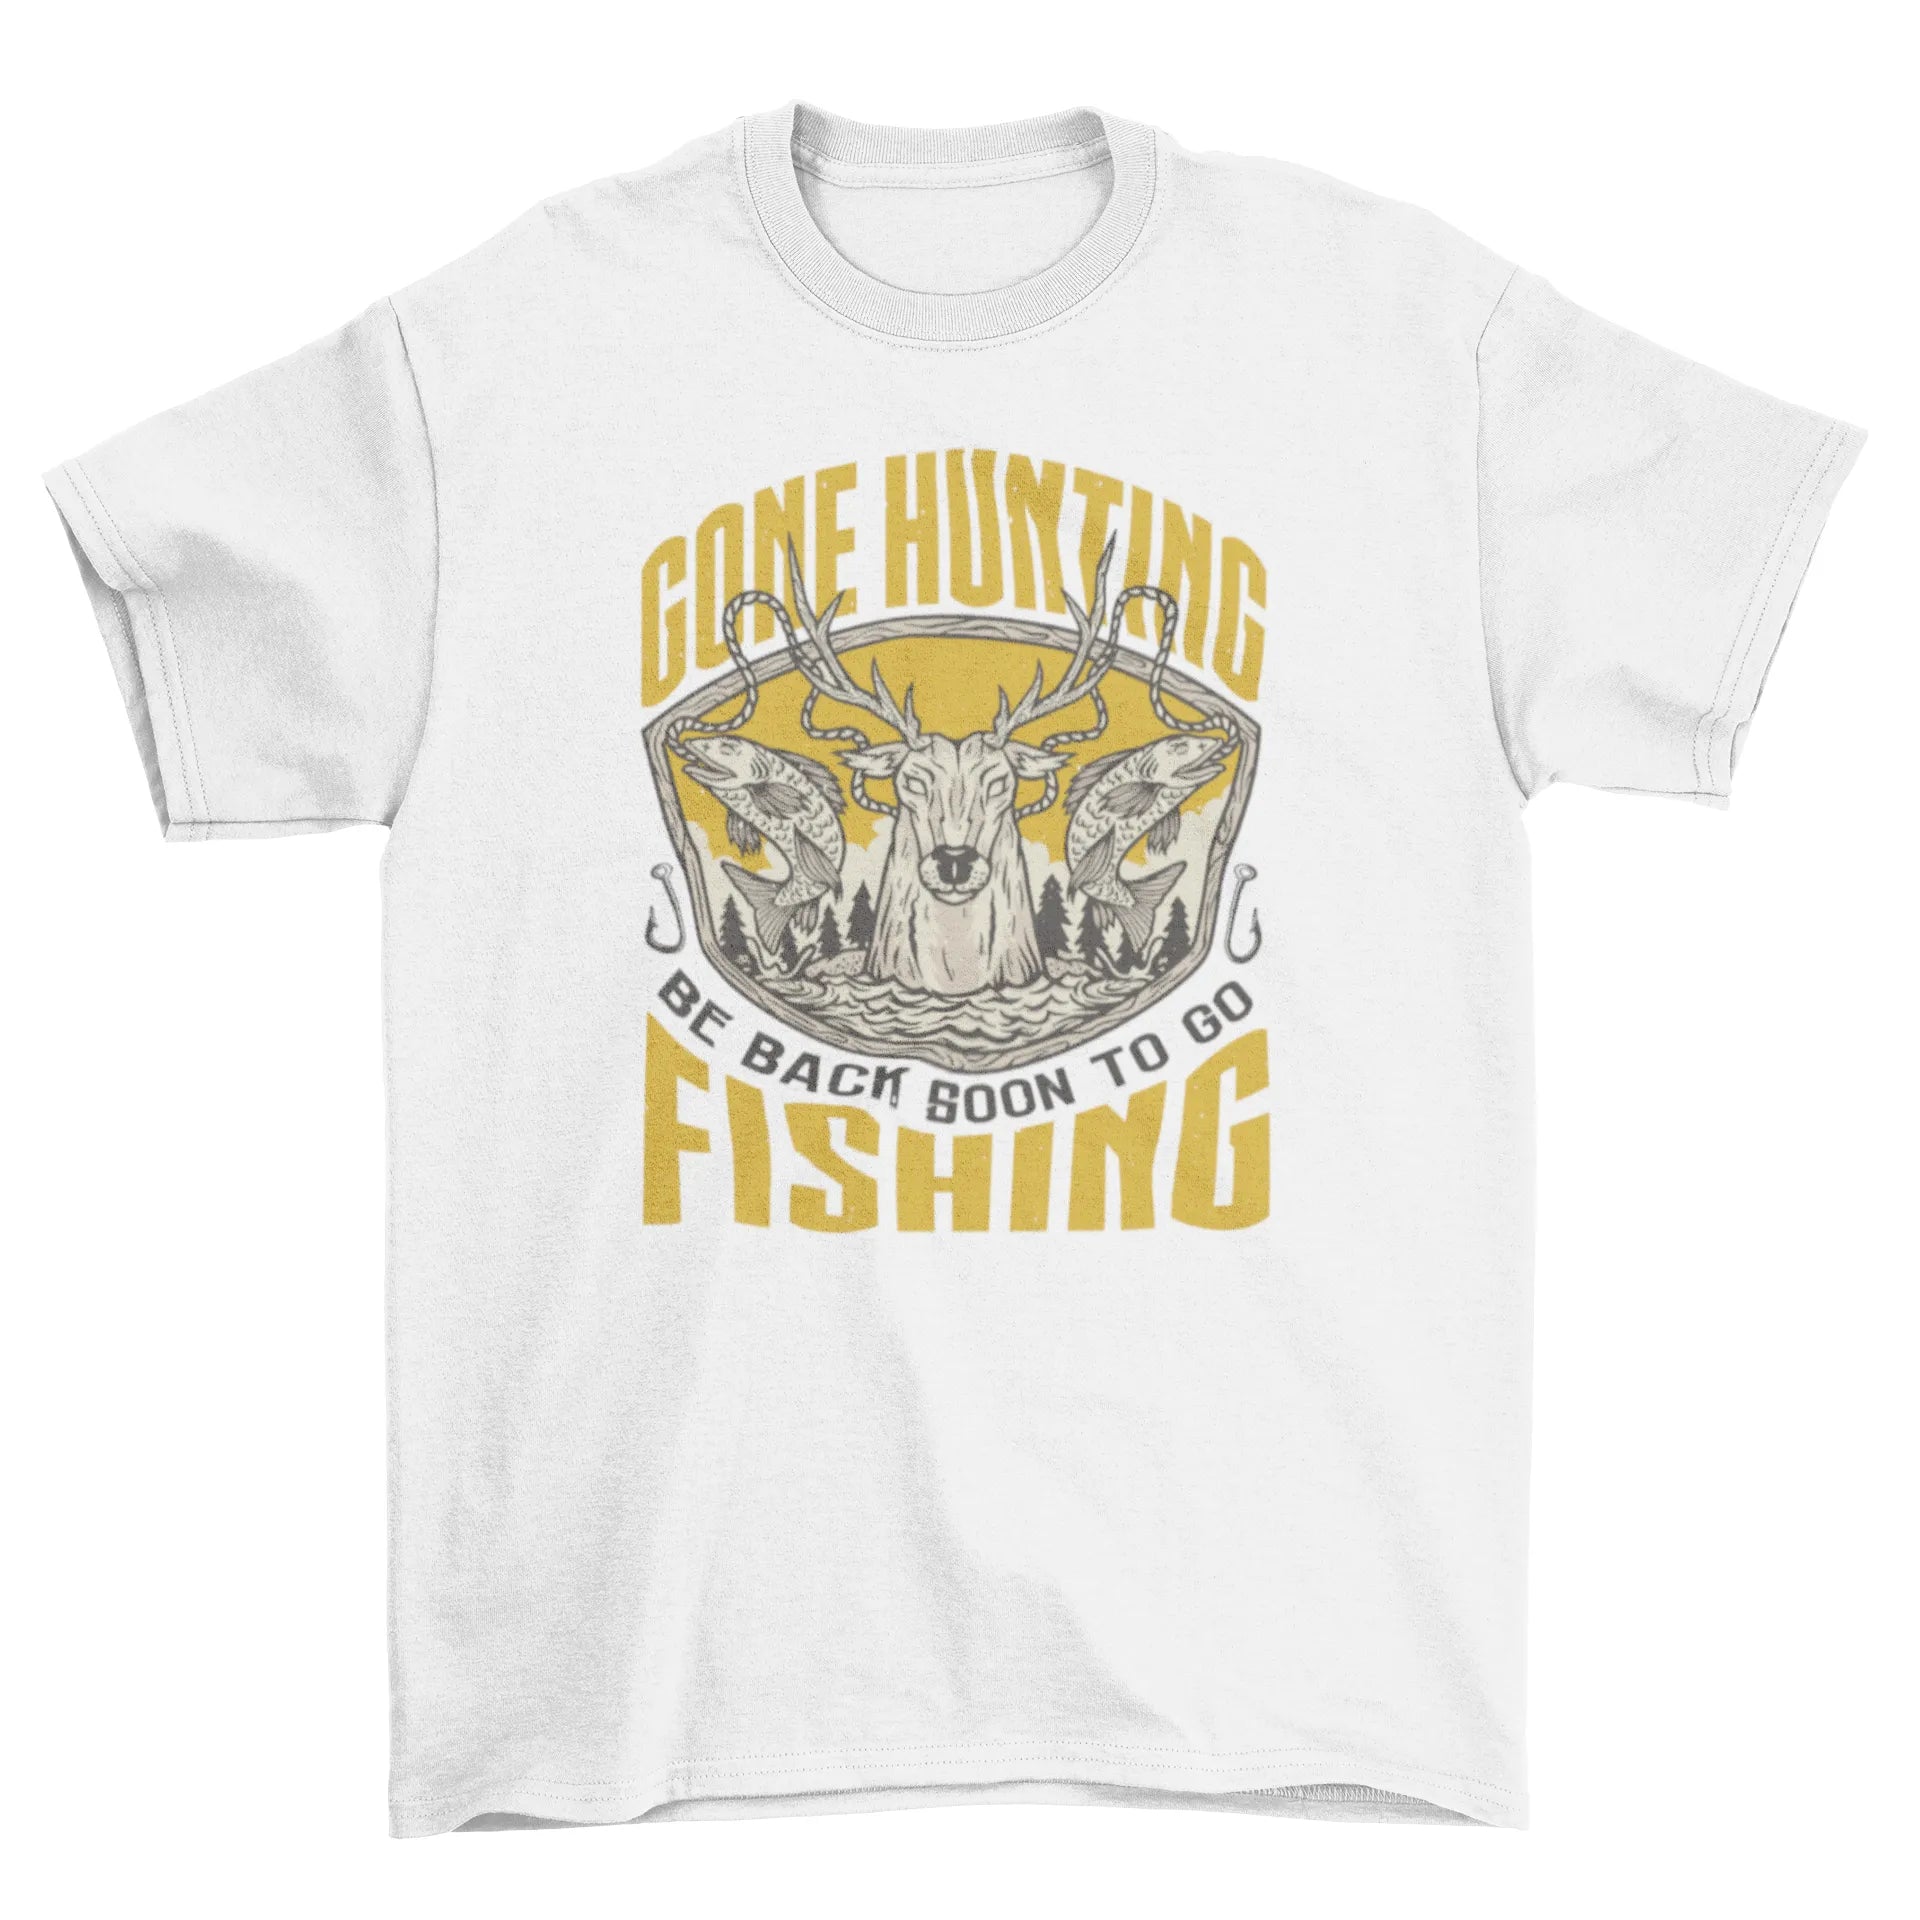 Gone Hunting and Fishing T-shirt